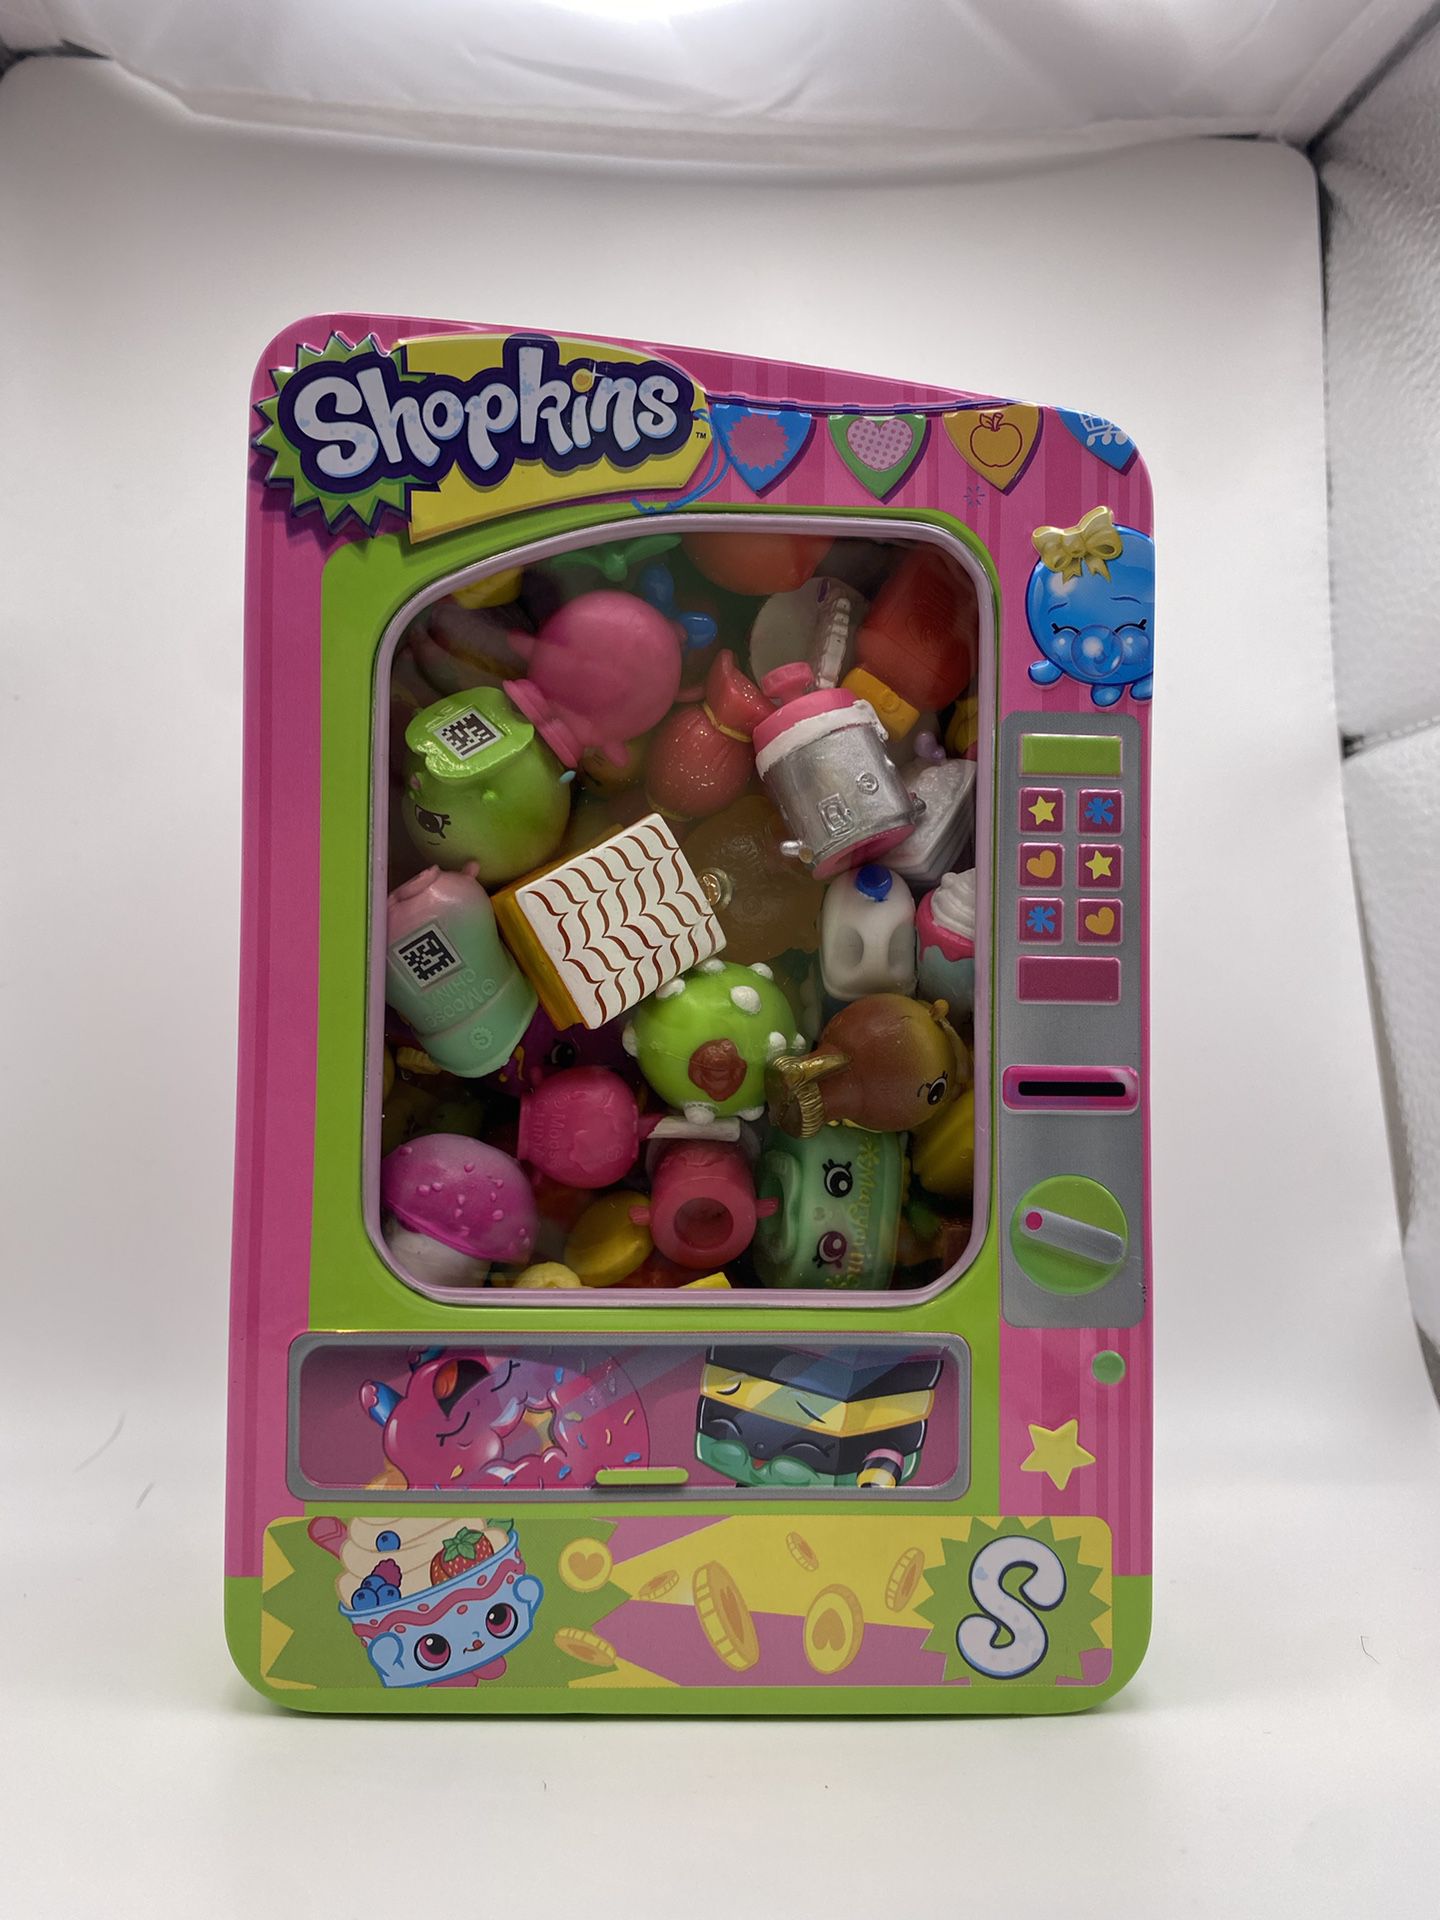 Shopkins Vending Machine and all food-related Shopkins